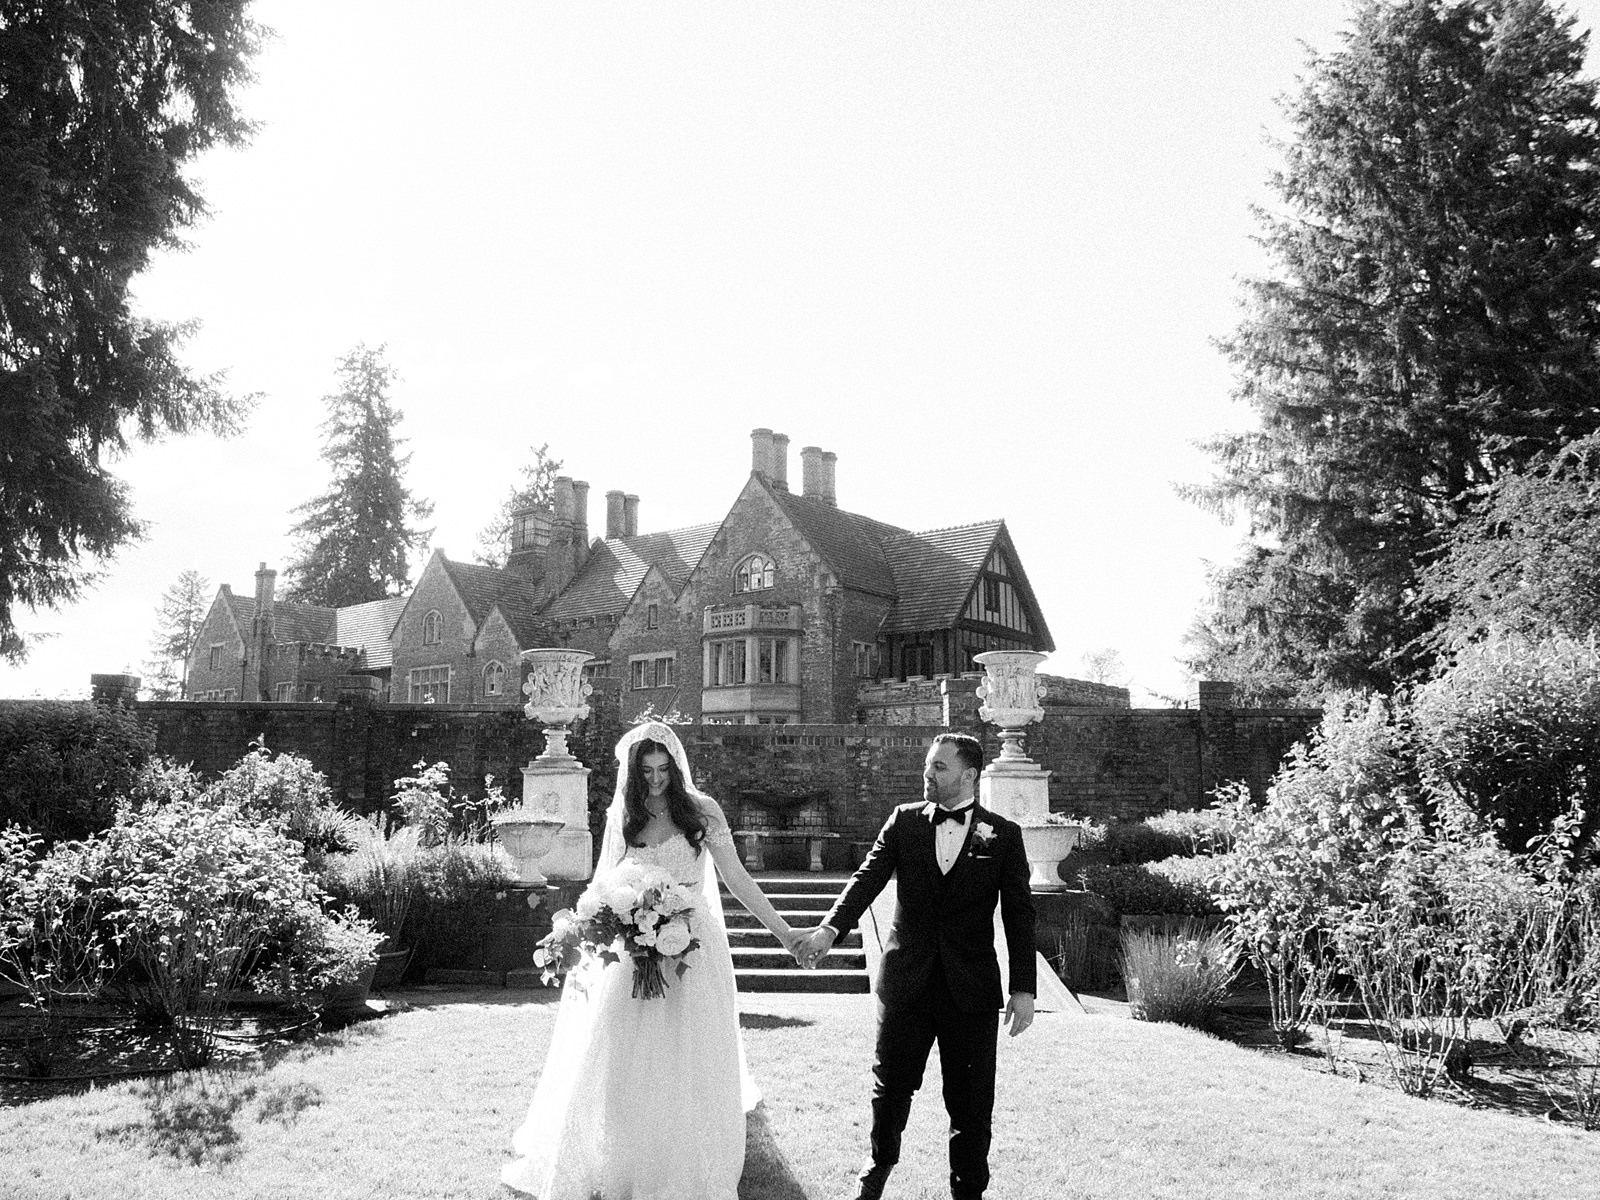 Bride and groom walk in garden in front of Thornewood Castle - Jacqueline Benét Photography